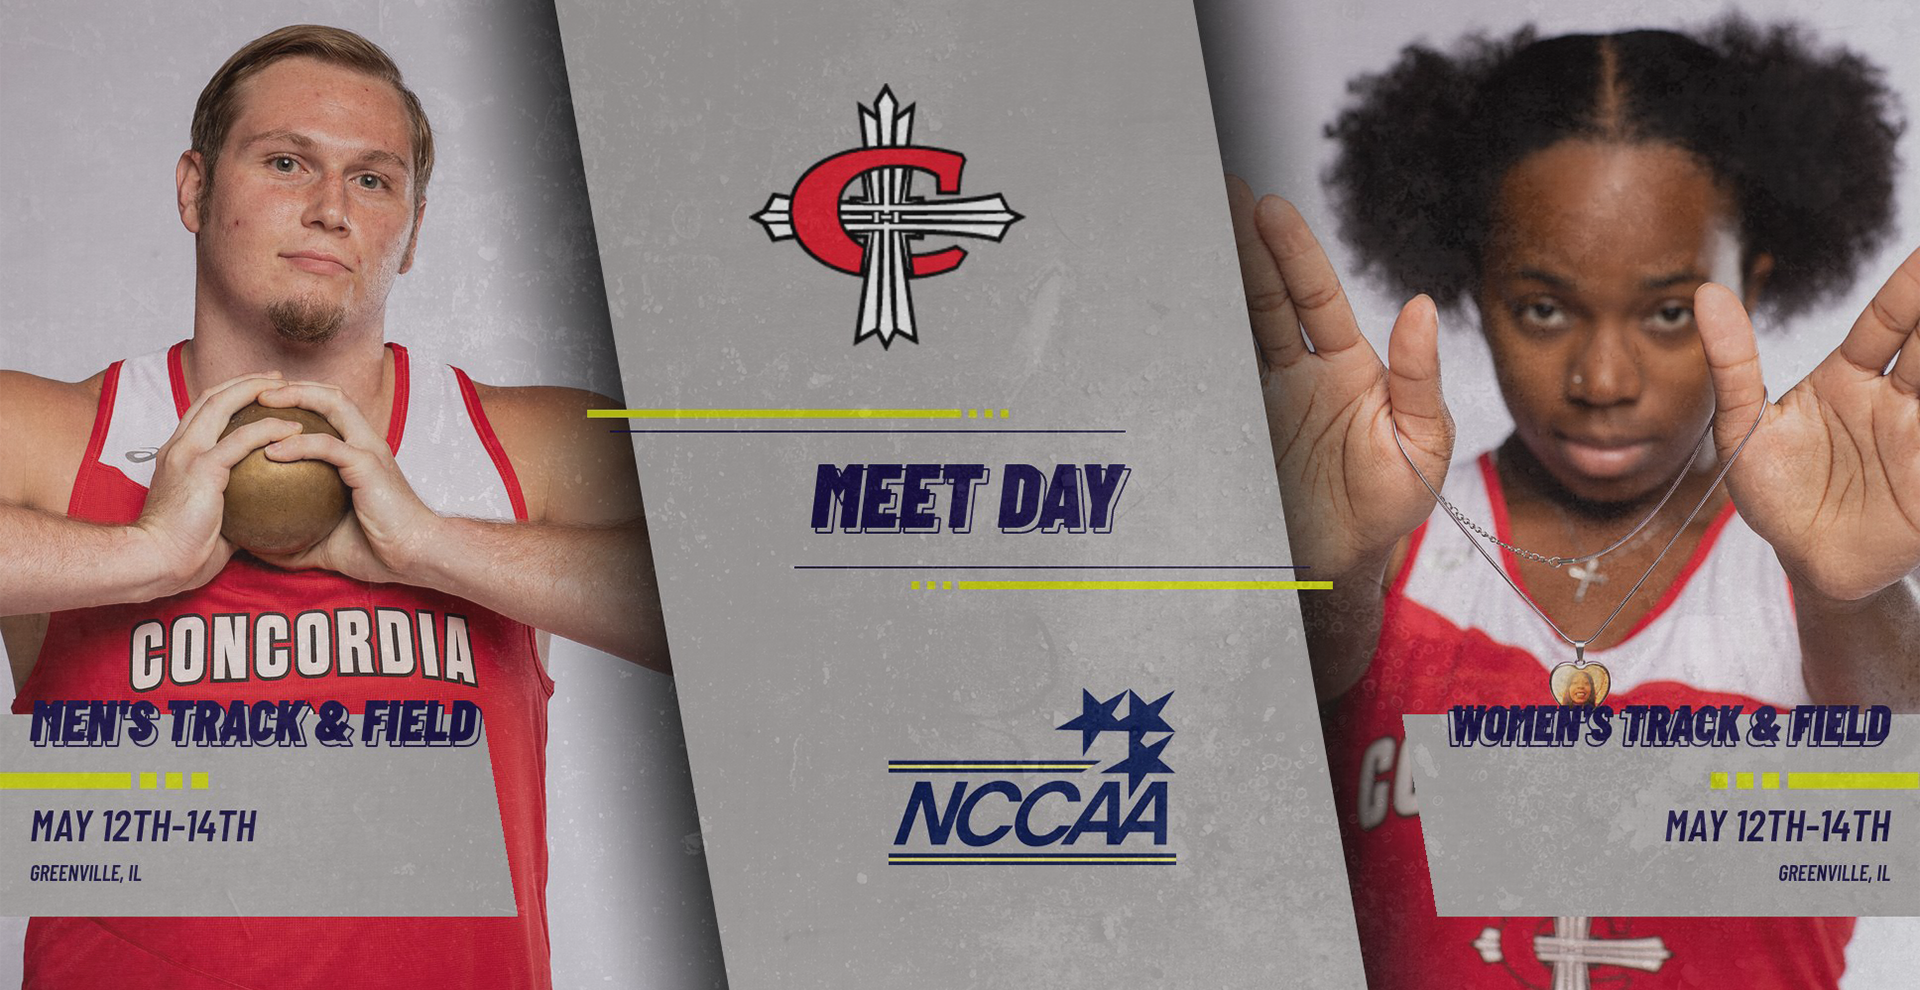 NCCAA CHAMPIONSHIP PREVIEW: CARDINALS SEND 8 STUDENT-ATHLETES TO ILLINOIS TO BRING HOME A CARDINAL WIN